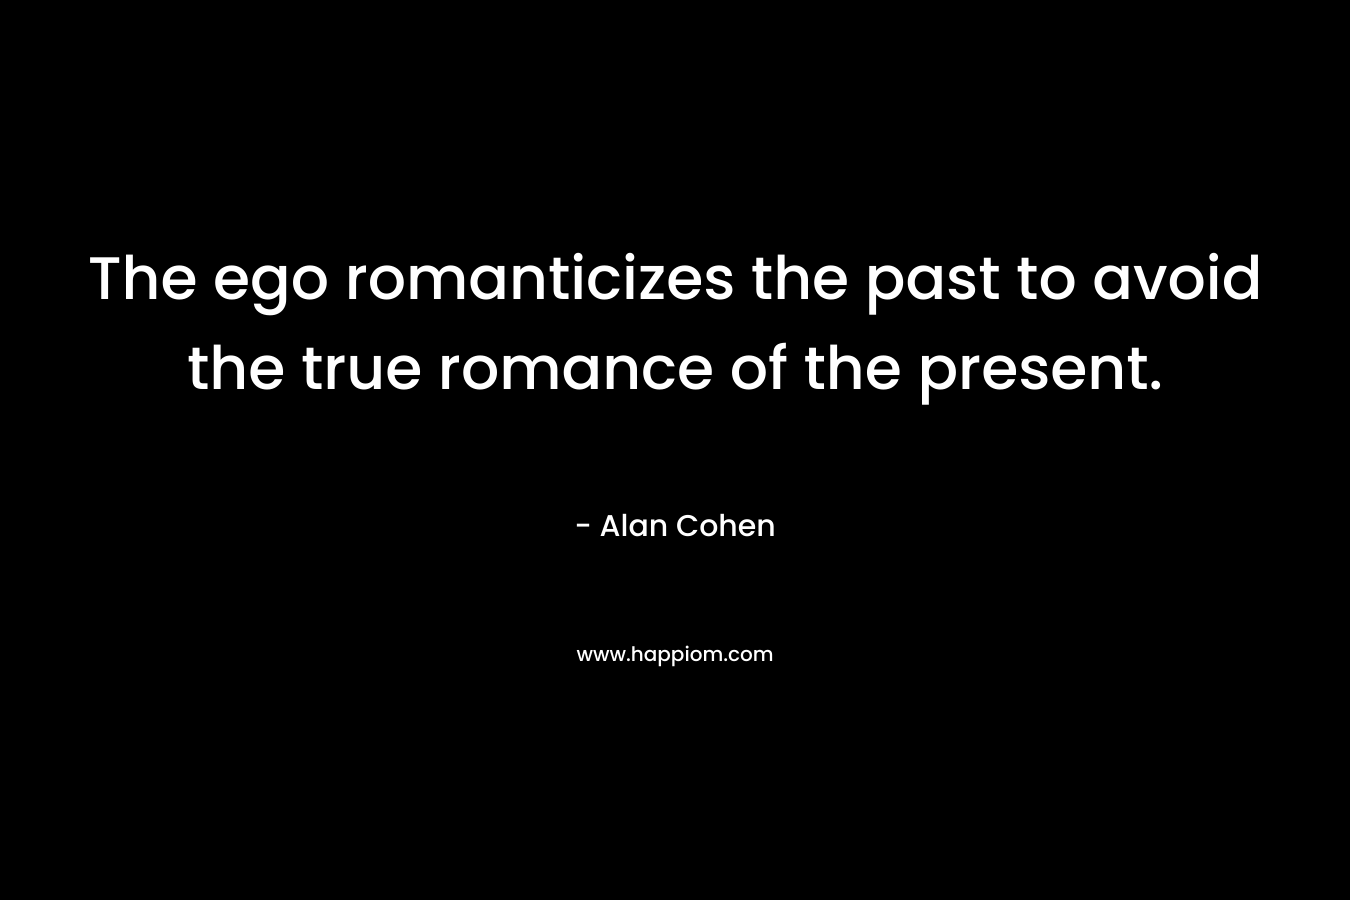 The ego romanticizes the past to avoid the true romance of the present.